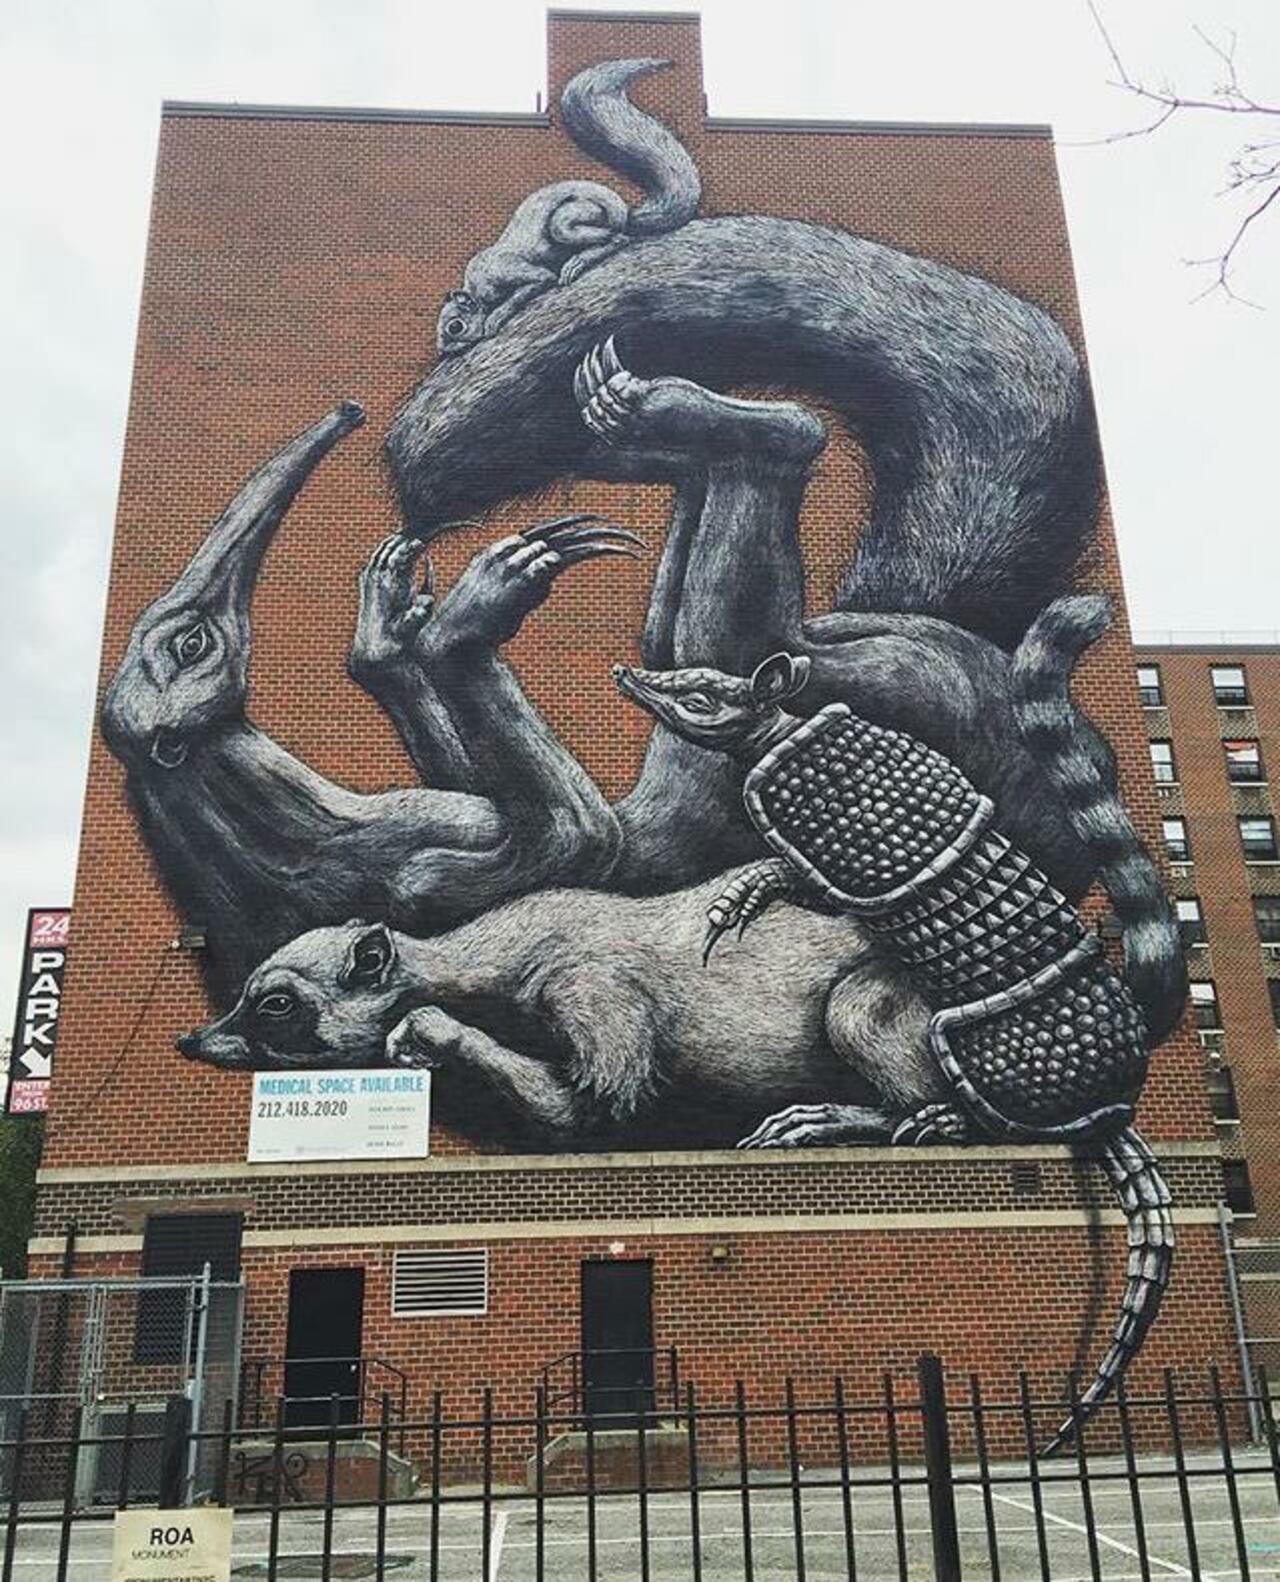 The completed new large scale Street Art wall by ROA in NYC

#art #graffiti #mural #streetart http://t.co/qNxMFuCVHL